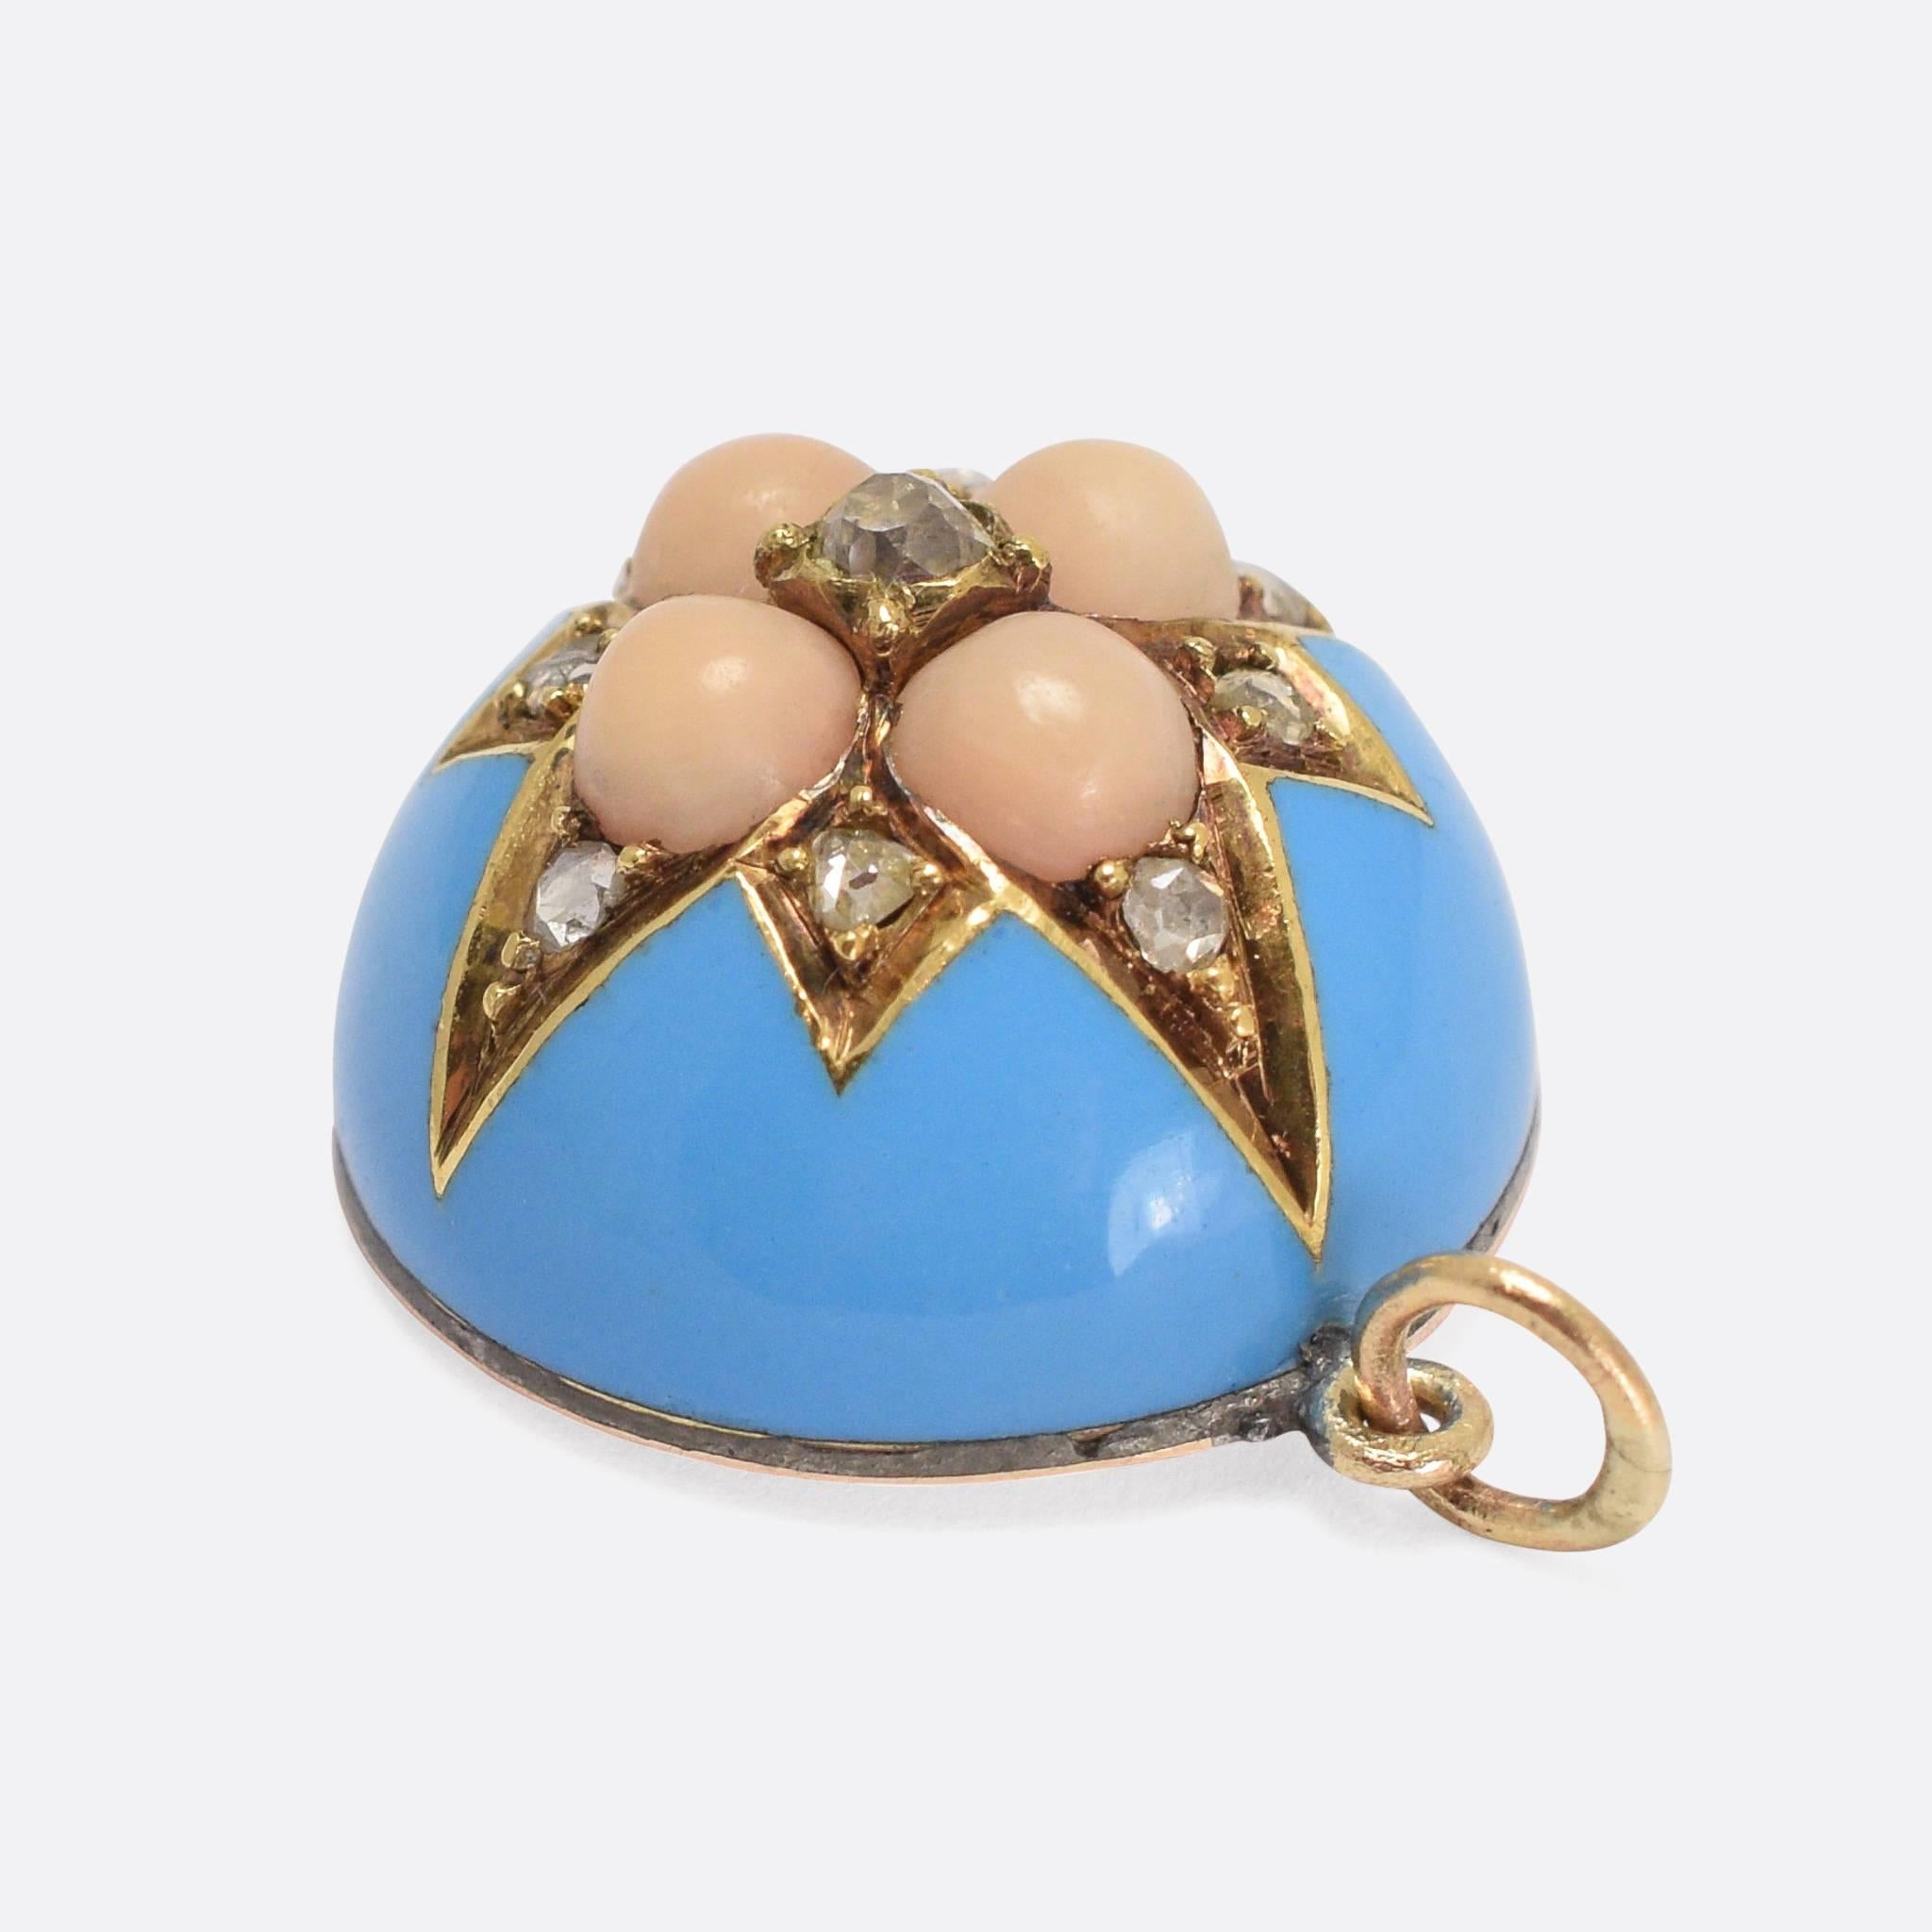 A cool Victorian pendant, set with angel skin coral and rose cut diamonds, and finished in turquoise enamel. The hemispherical design is topped with an 8-pointed star, within which the stones are clustered. It's a good wearable size (3/4